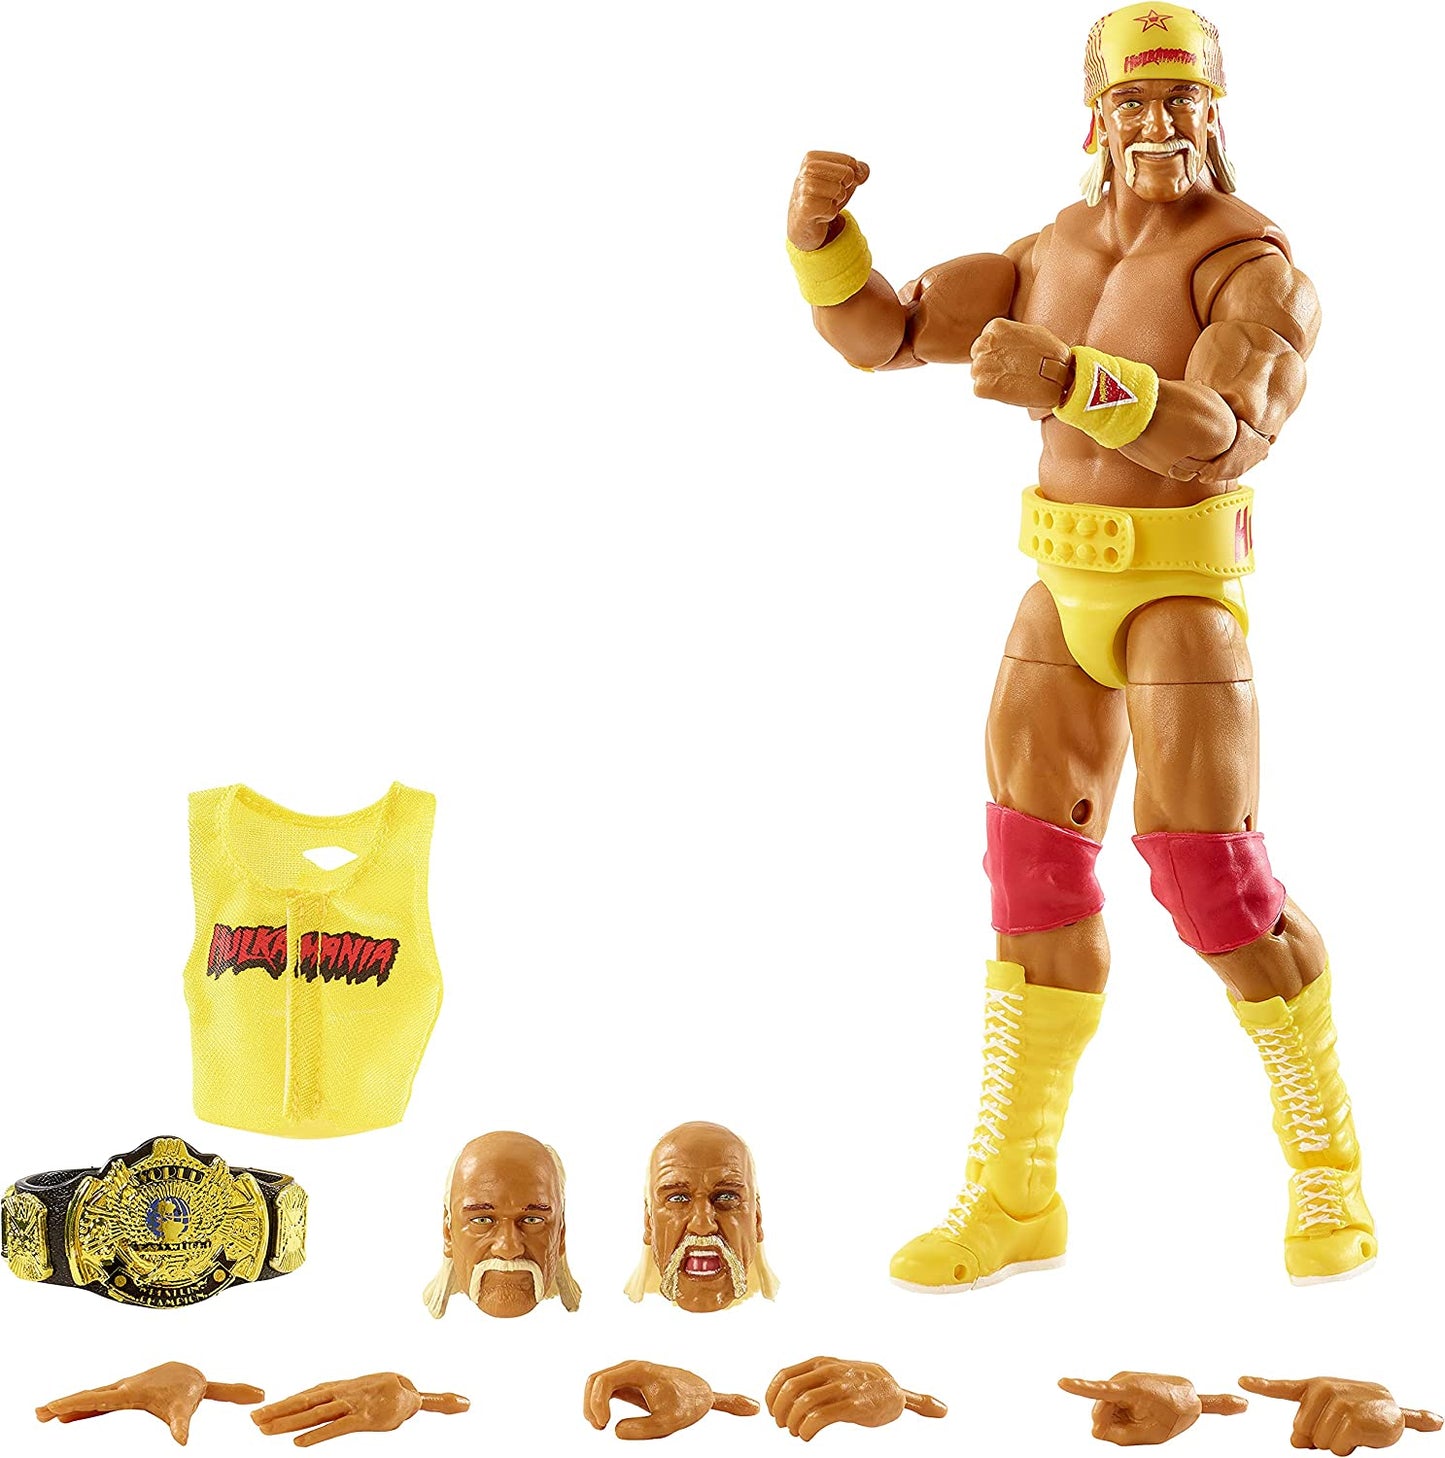 2021 WWE Mattel Ultimate Edition Fan Takeover Hulk Hogan [Exclusive, With Bandana On]